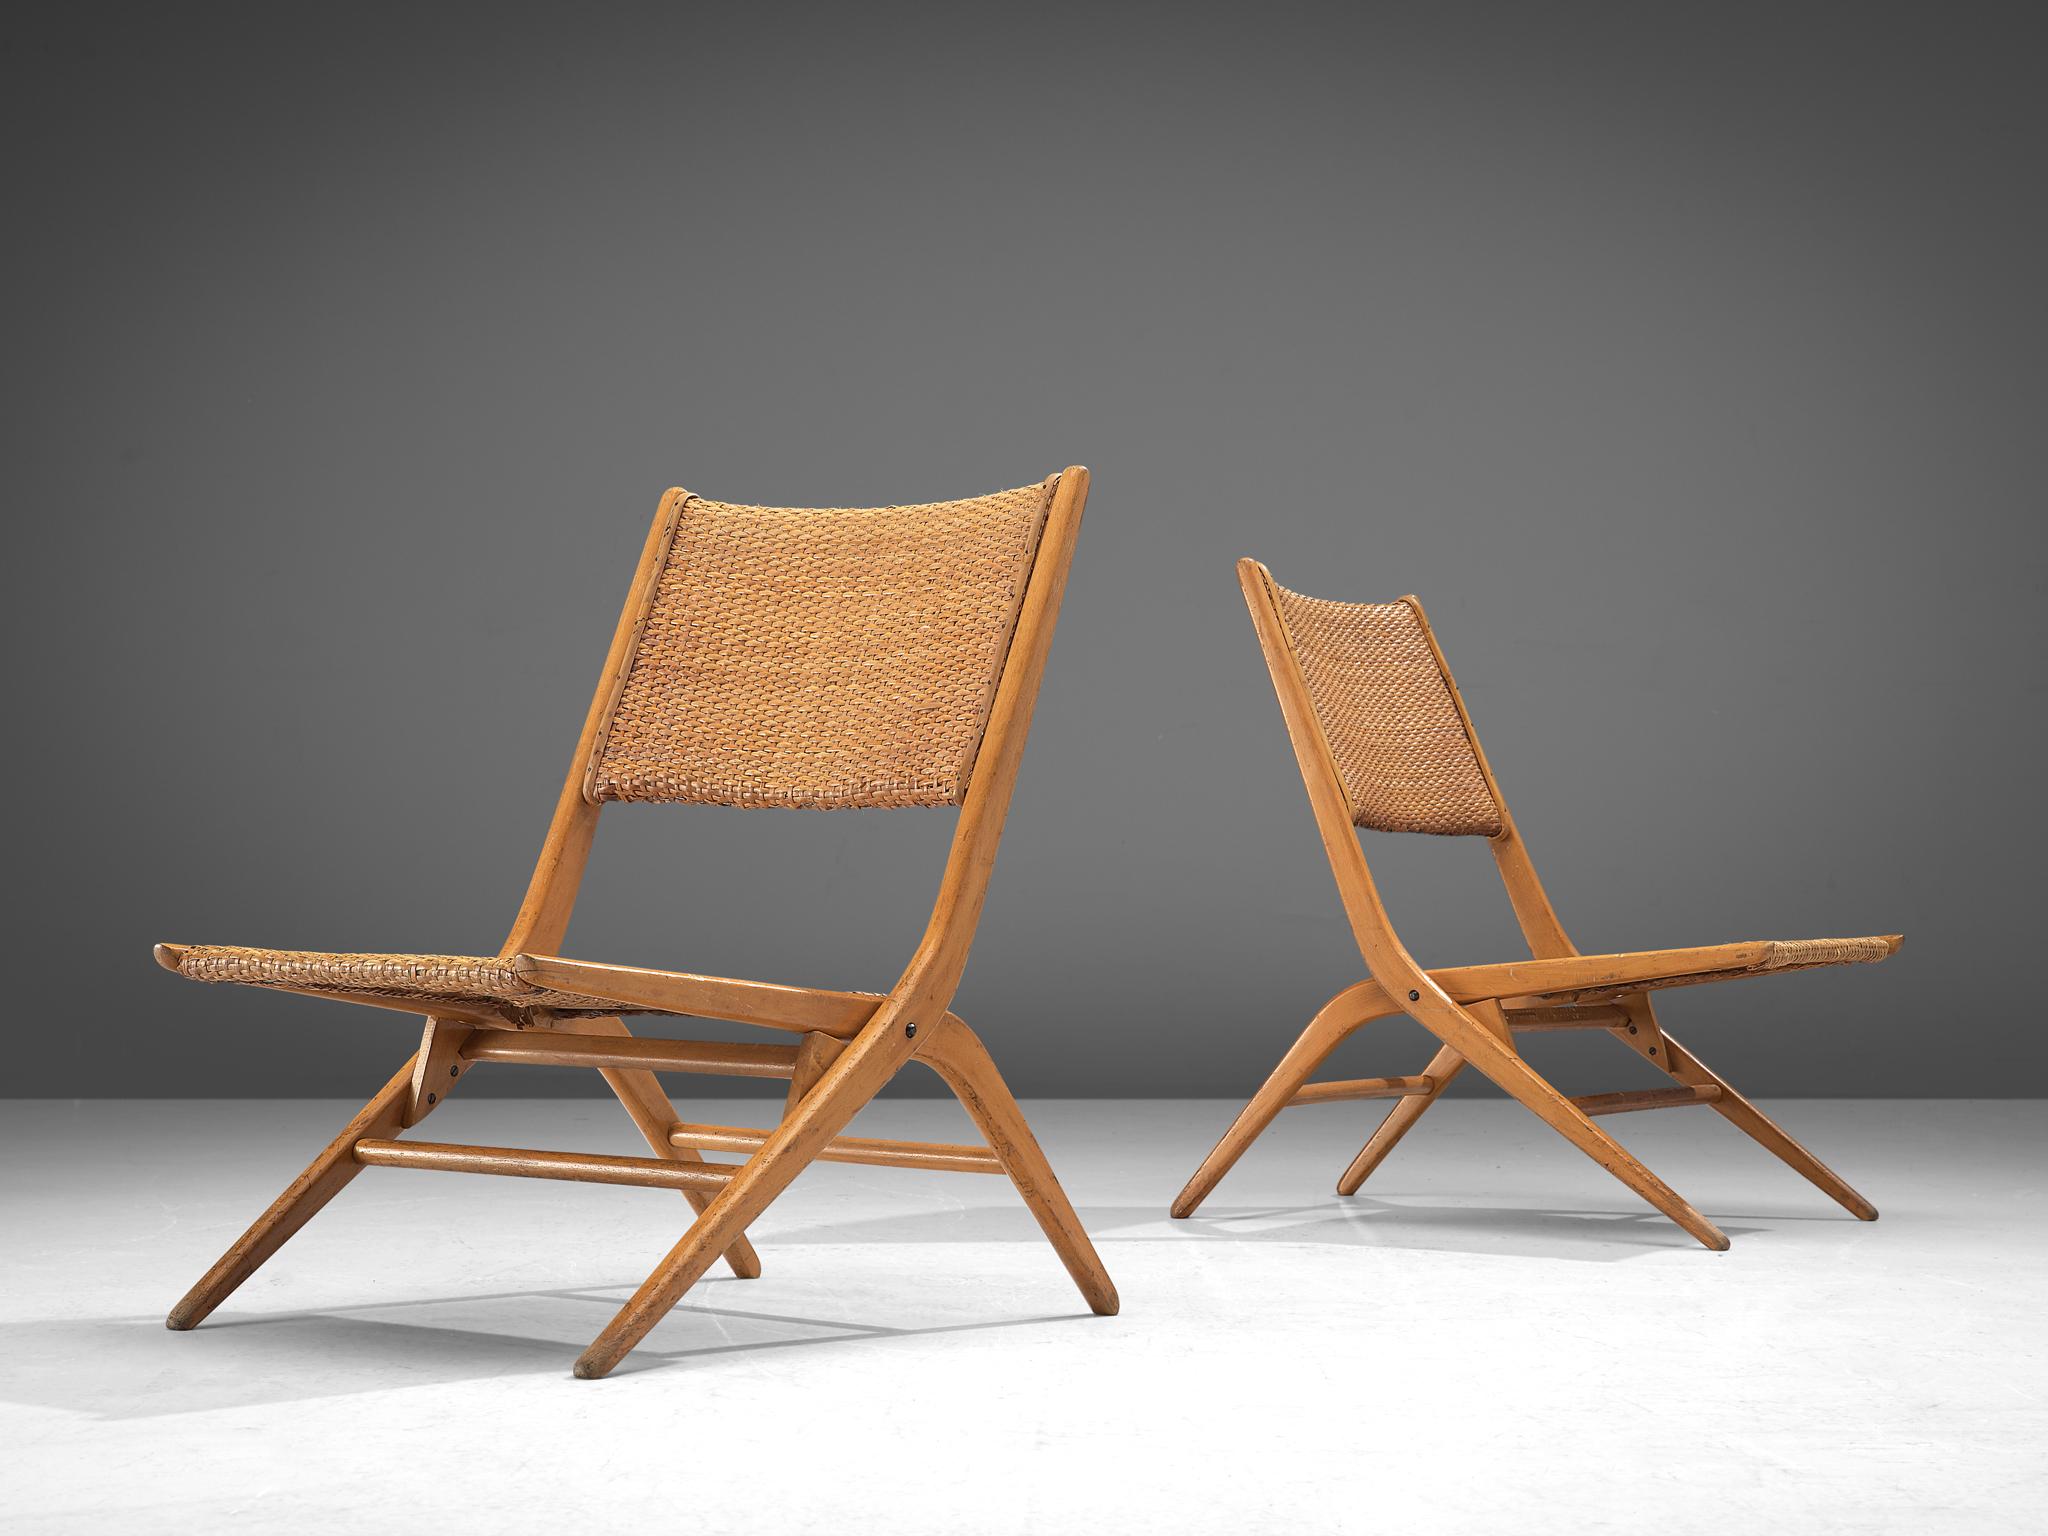 Pair of folding slipper chairs, cane and beech, Italy, 1960s

Elegant French folding chairs made of beech and can. The beech wooden frame is designed with high attention to detail as seen in the openings, curves and lines. Wonderful chairs that